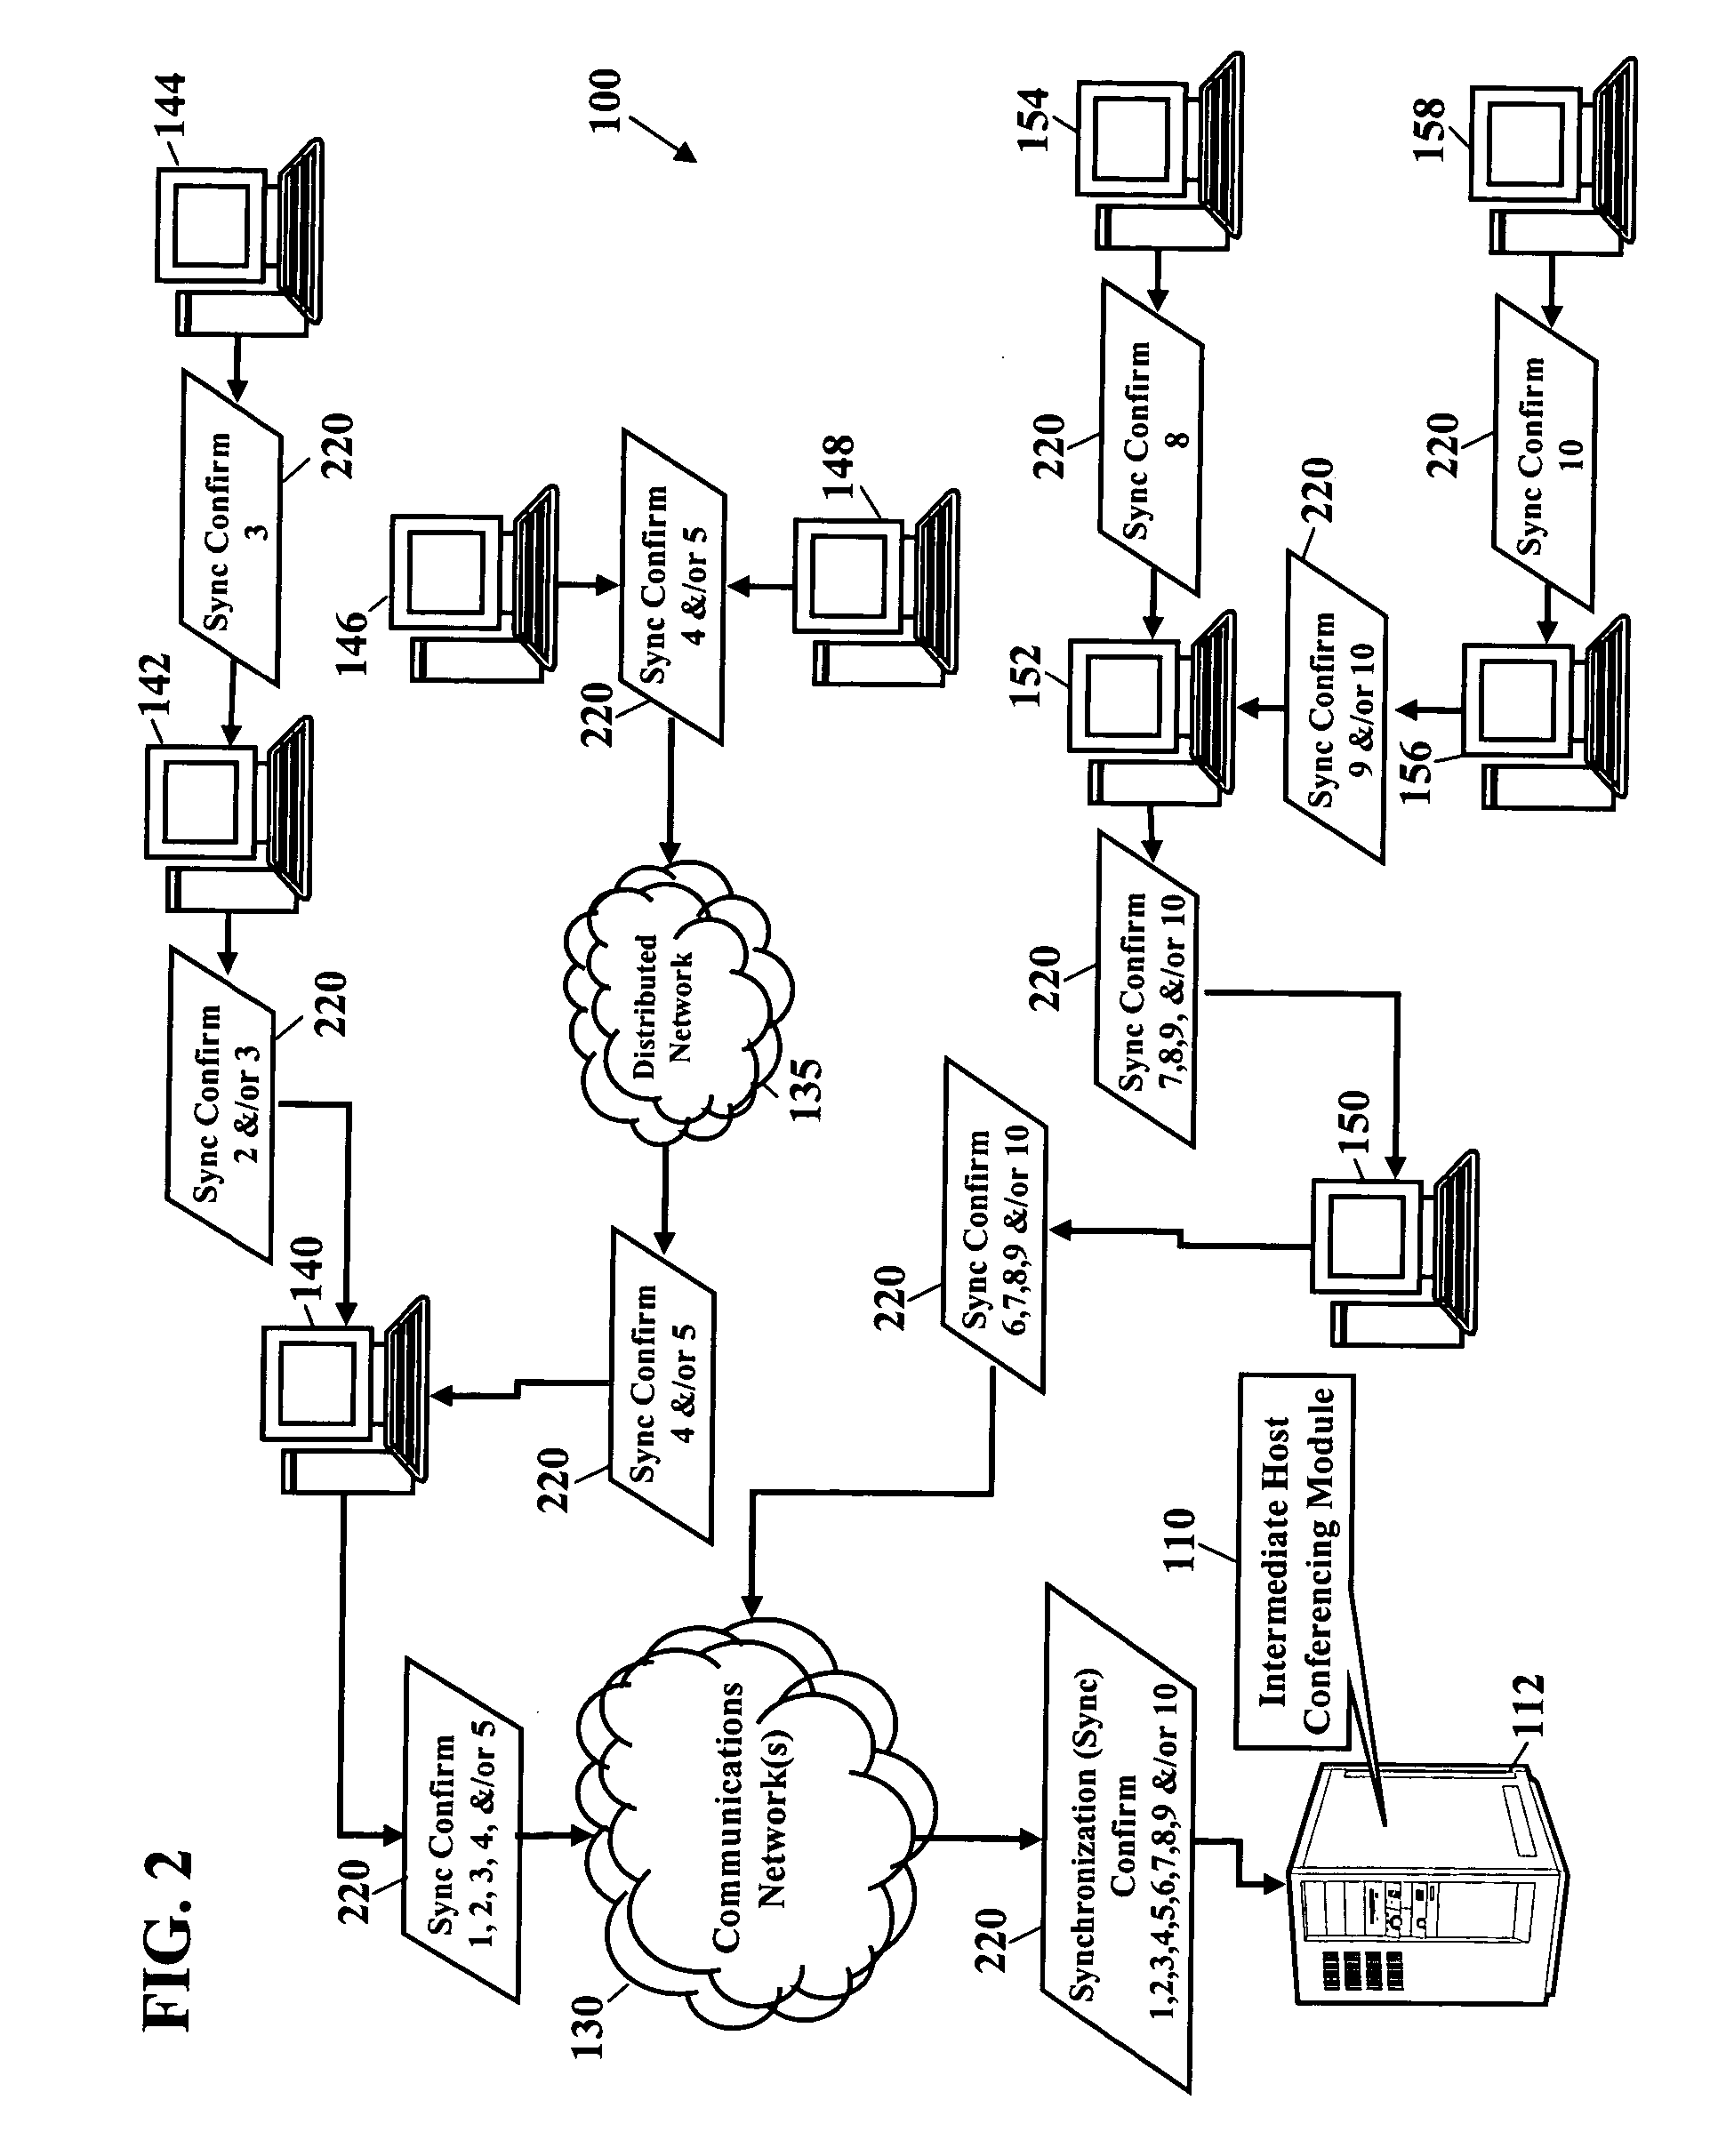 Network conferencing using method for distributed computing and/or distributed objects to intermediate host for presentation to a communications device